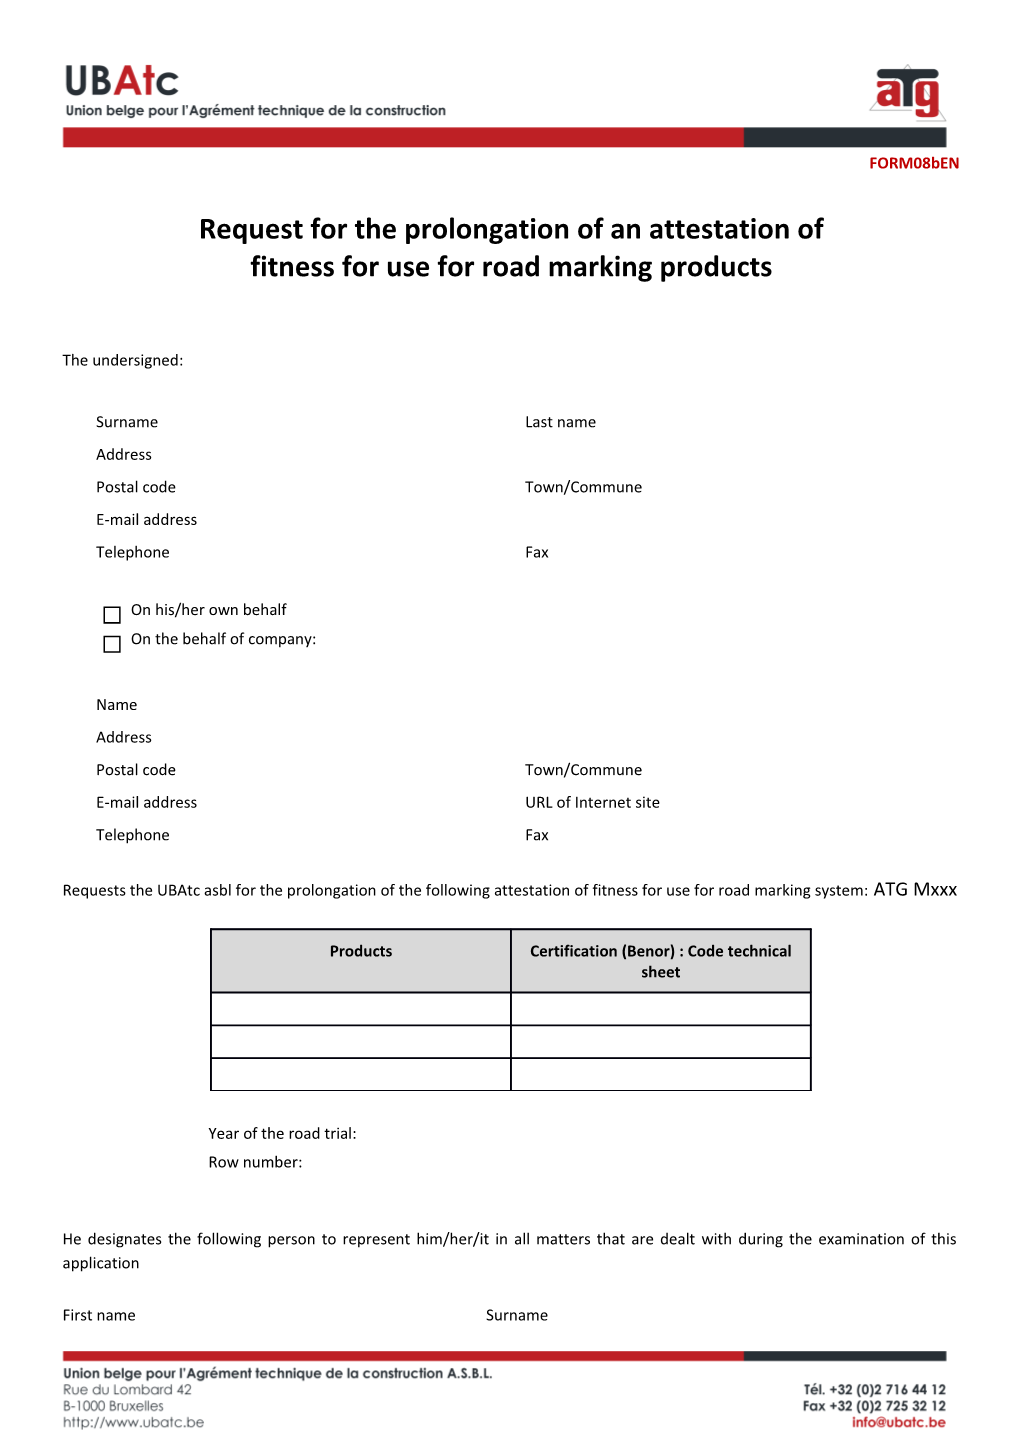 Request for the Prolongation of an Attestation of Fitness for Use for Road Marking Products